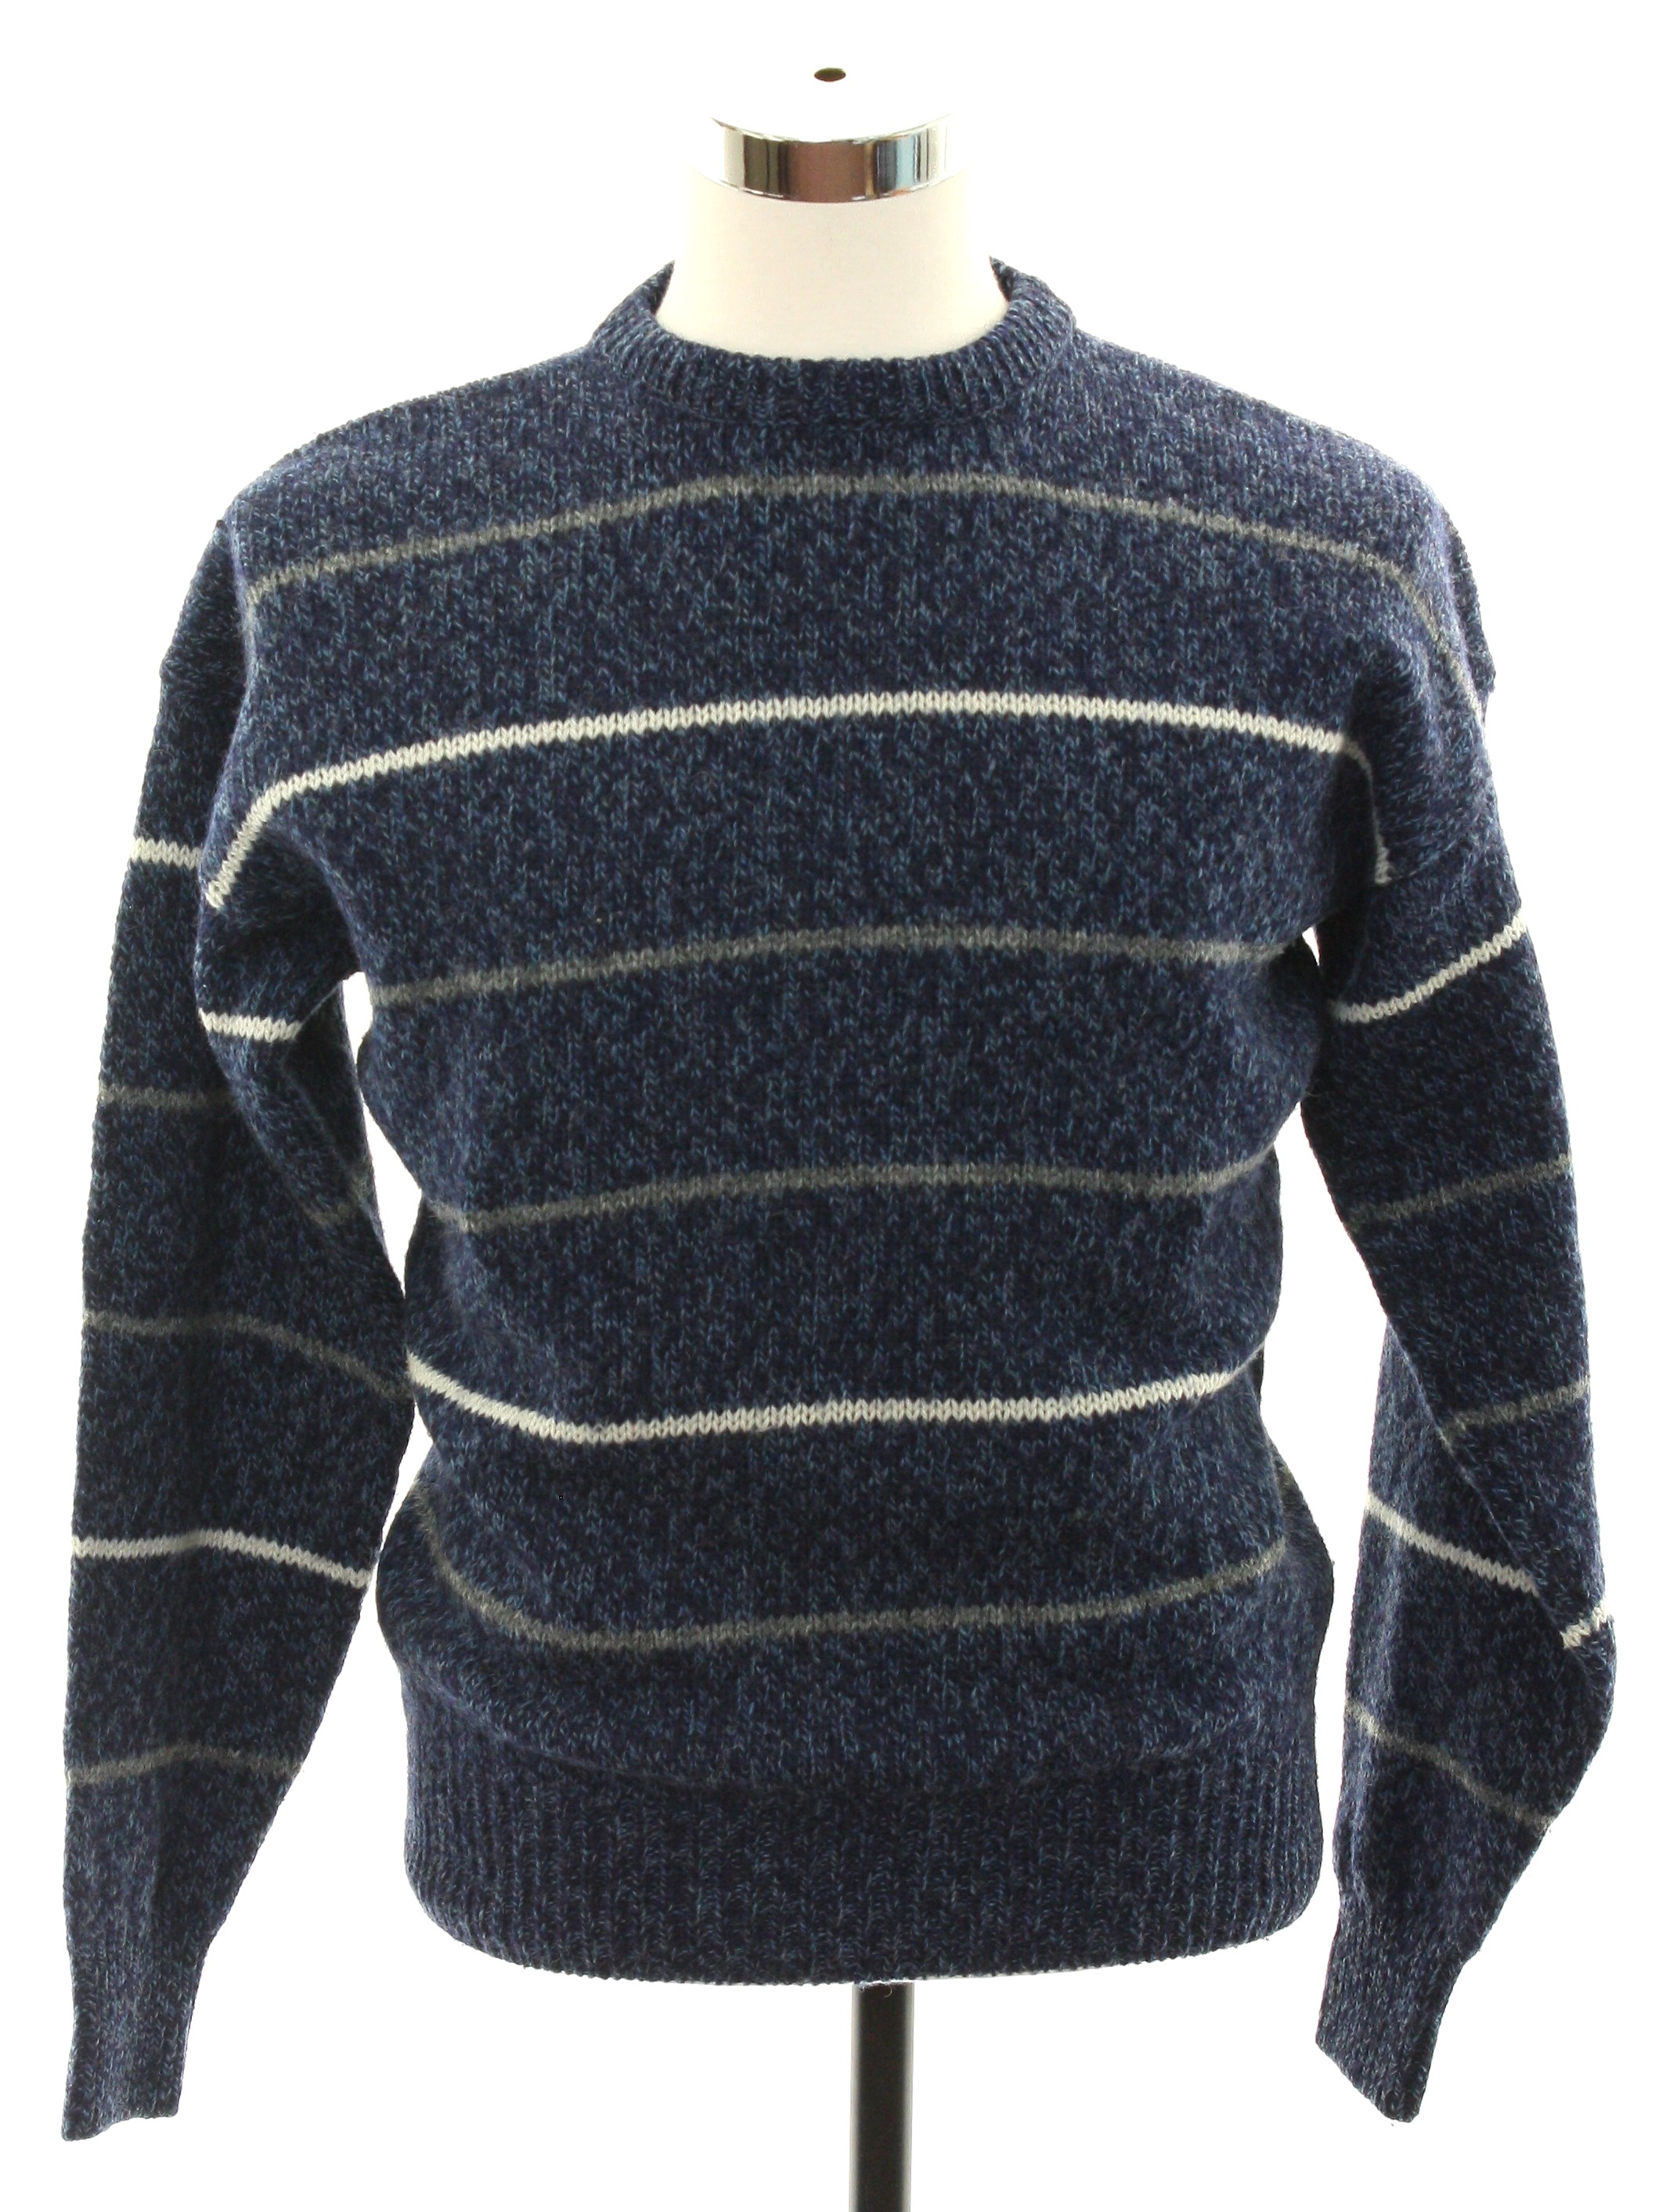 1980's Retro Sweater: 80s -Authentic Issue- Mens mottled blues with ...